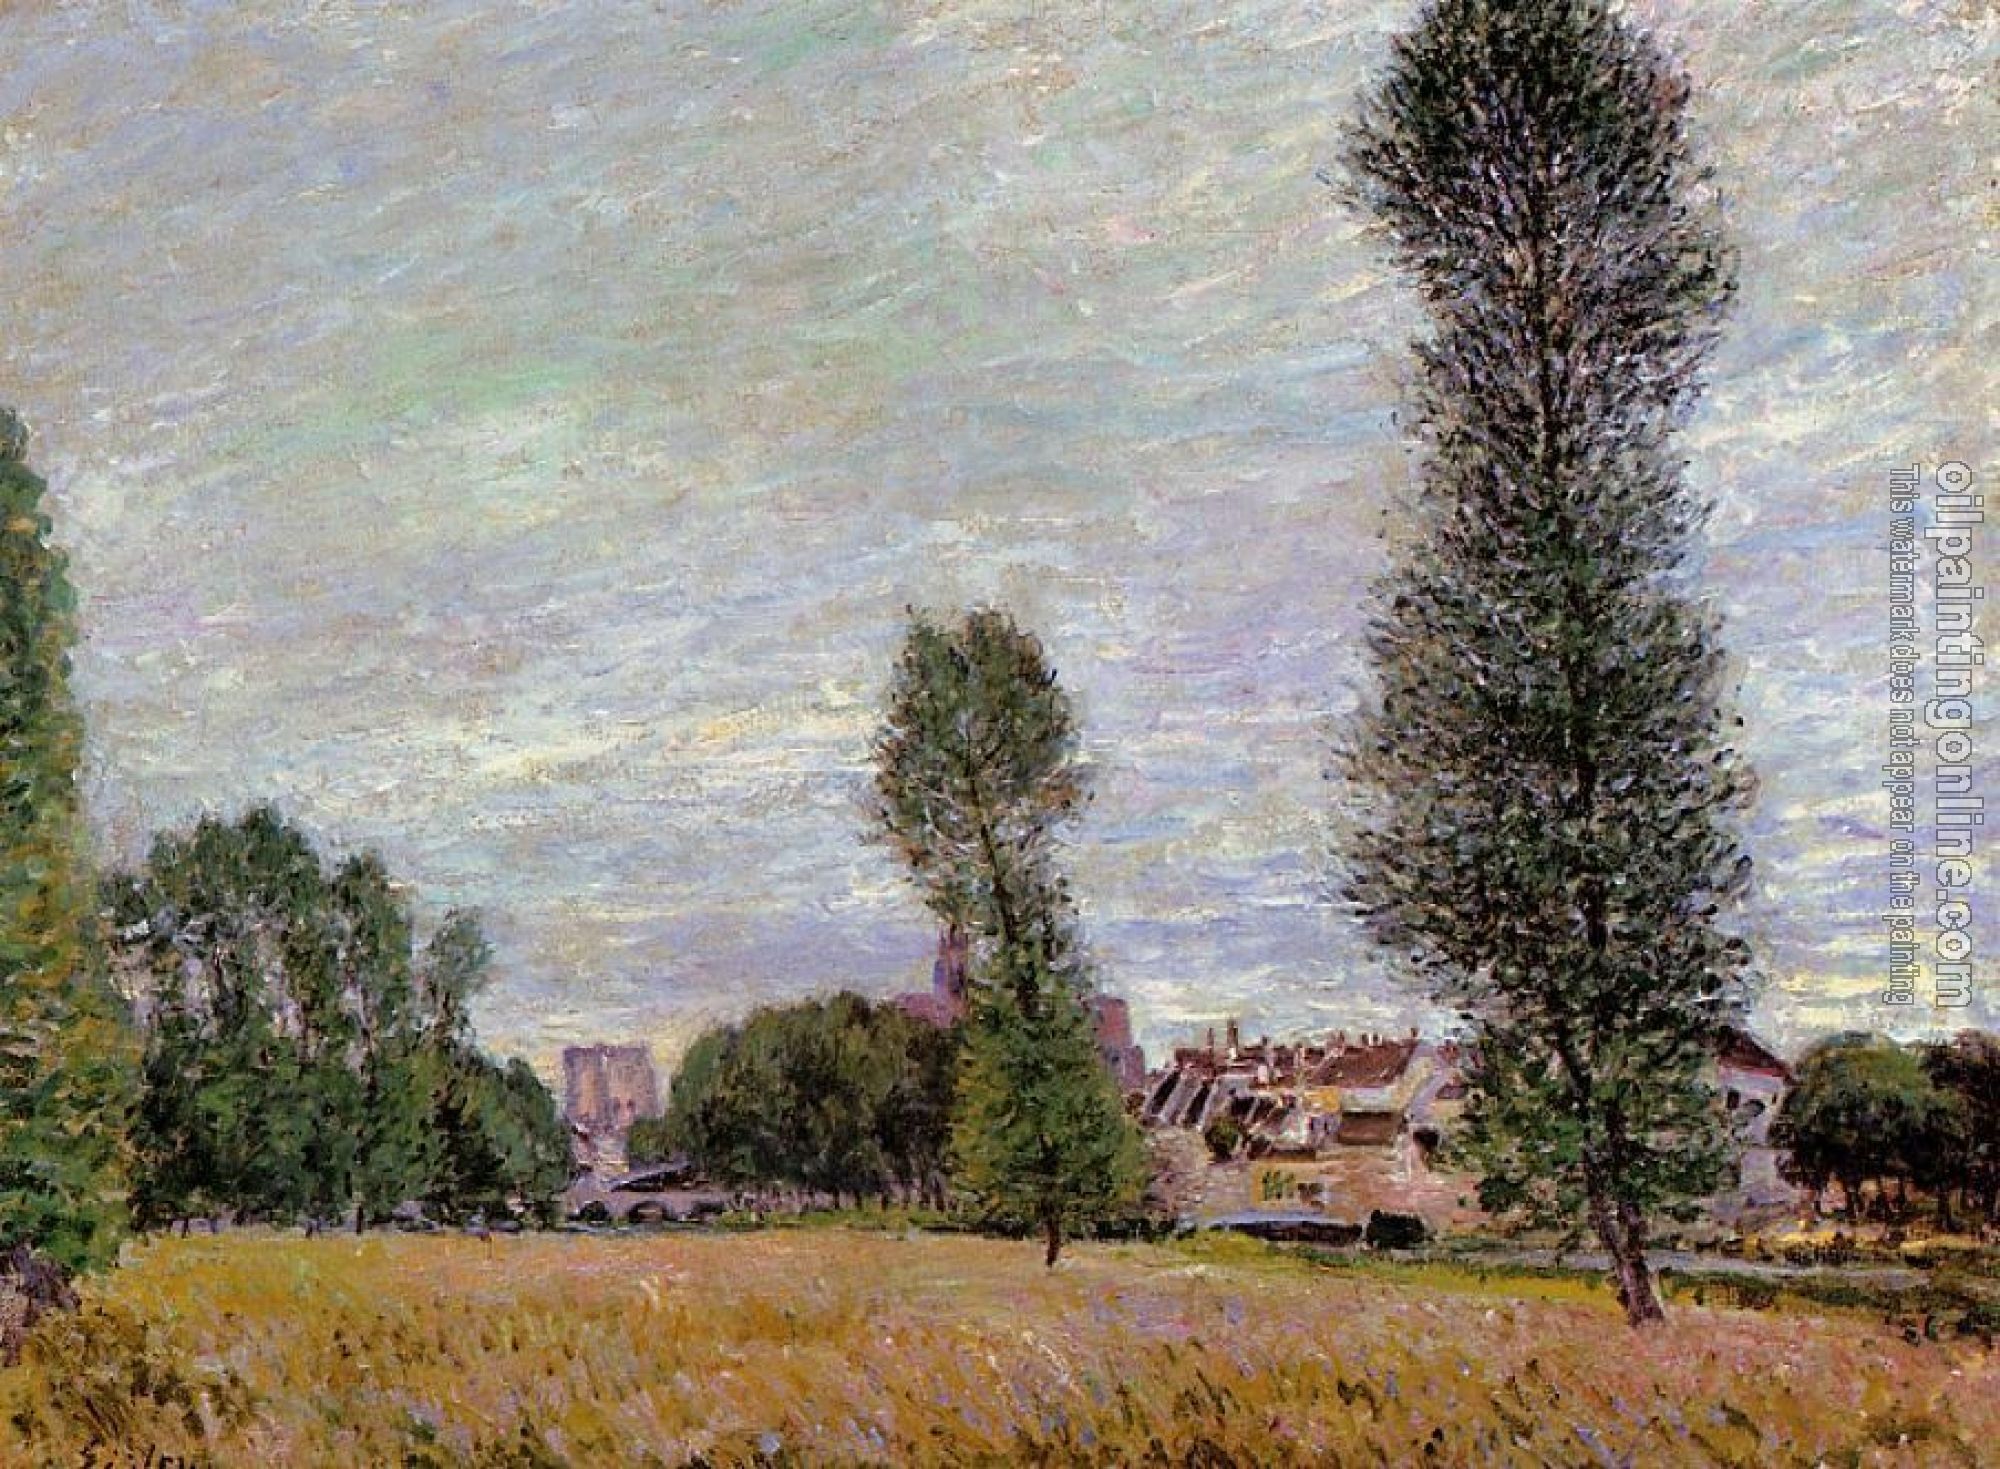 Sisley, Alfred - The Village of Moret, Seen from the Fields